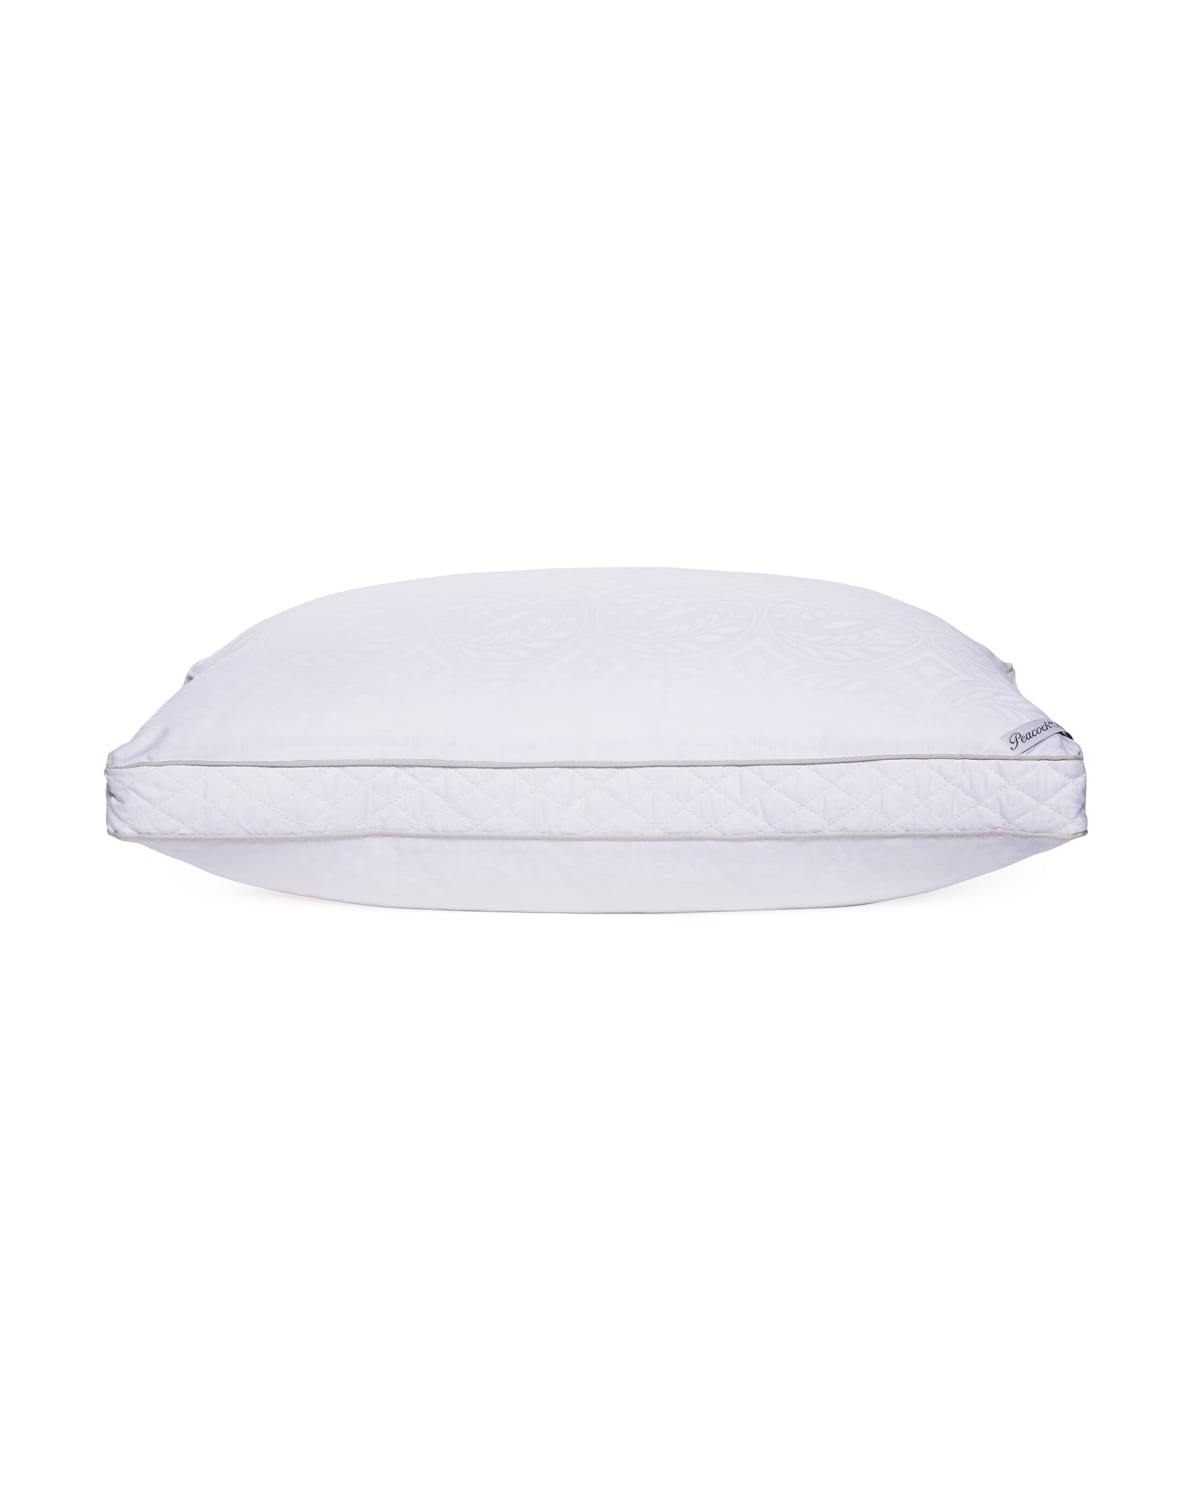 Image Peacock Alley Standard Down Pillow, Firm